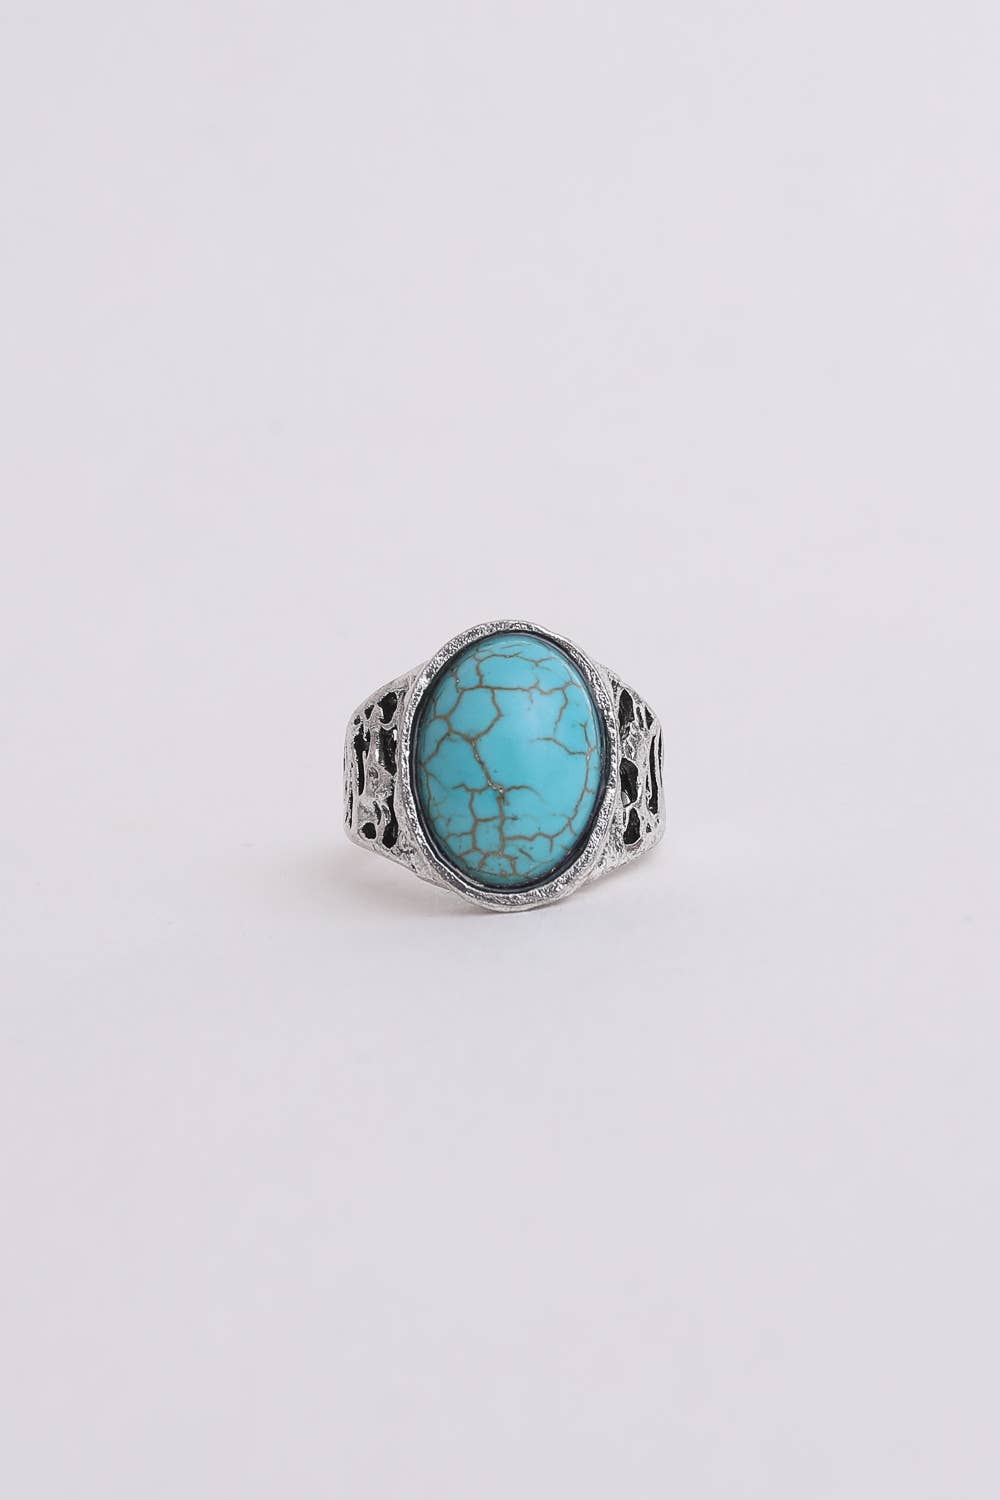 front view of turquoise and silver oval ring